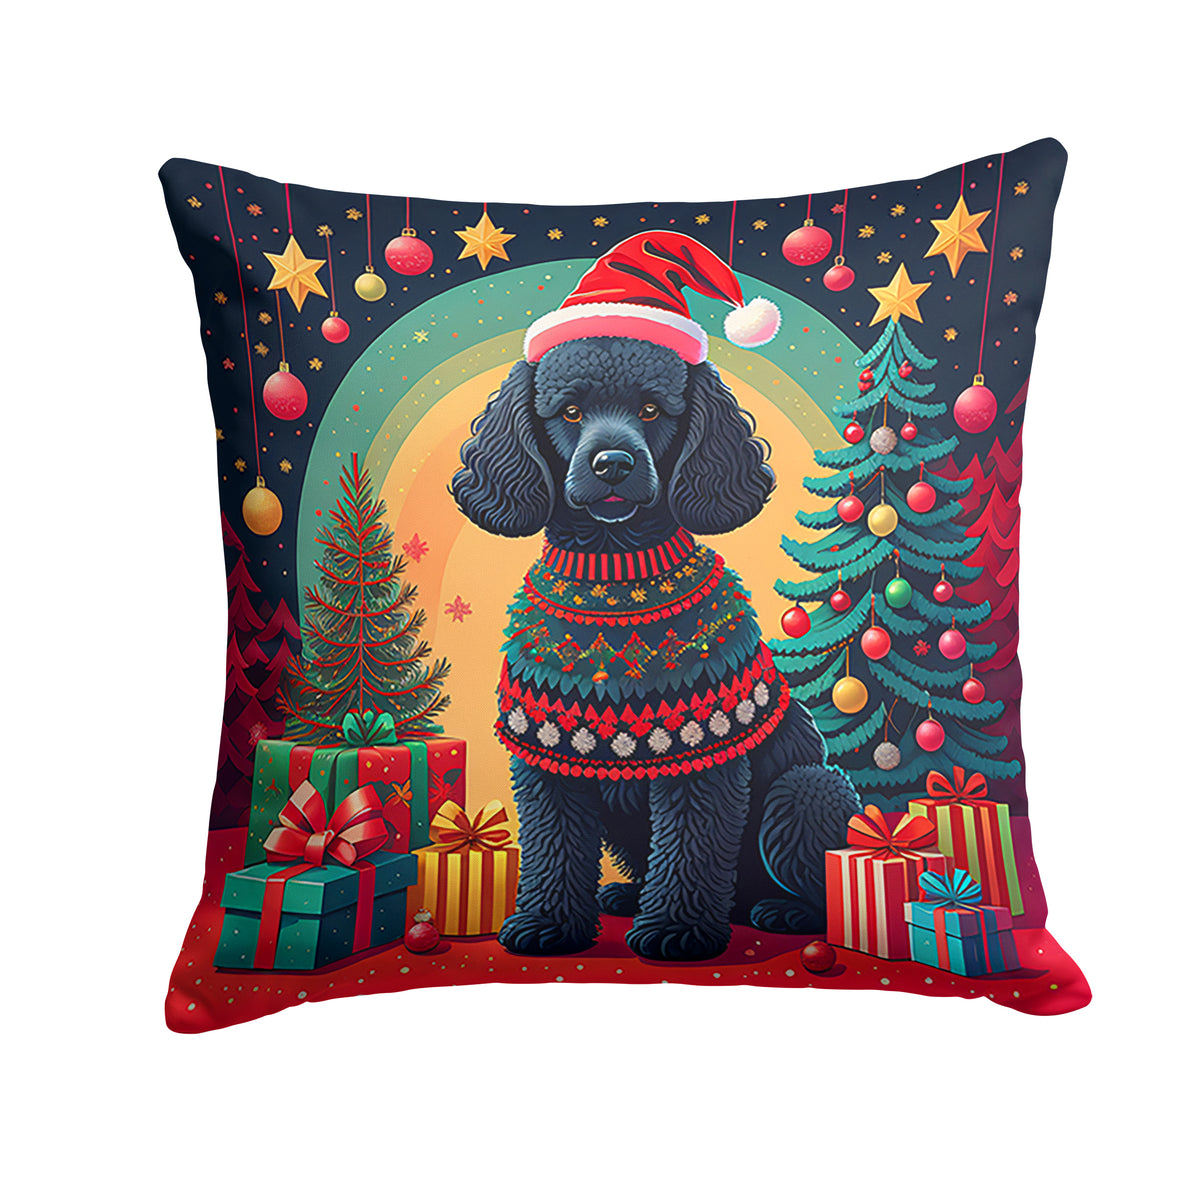 Buy this Black  Poodle Christmas Fabric Decorative Pillow